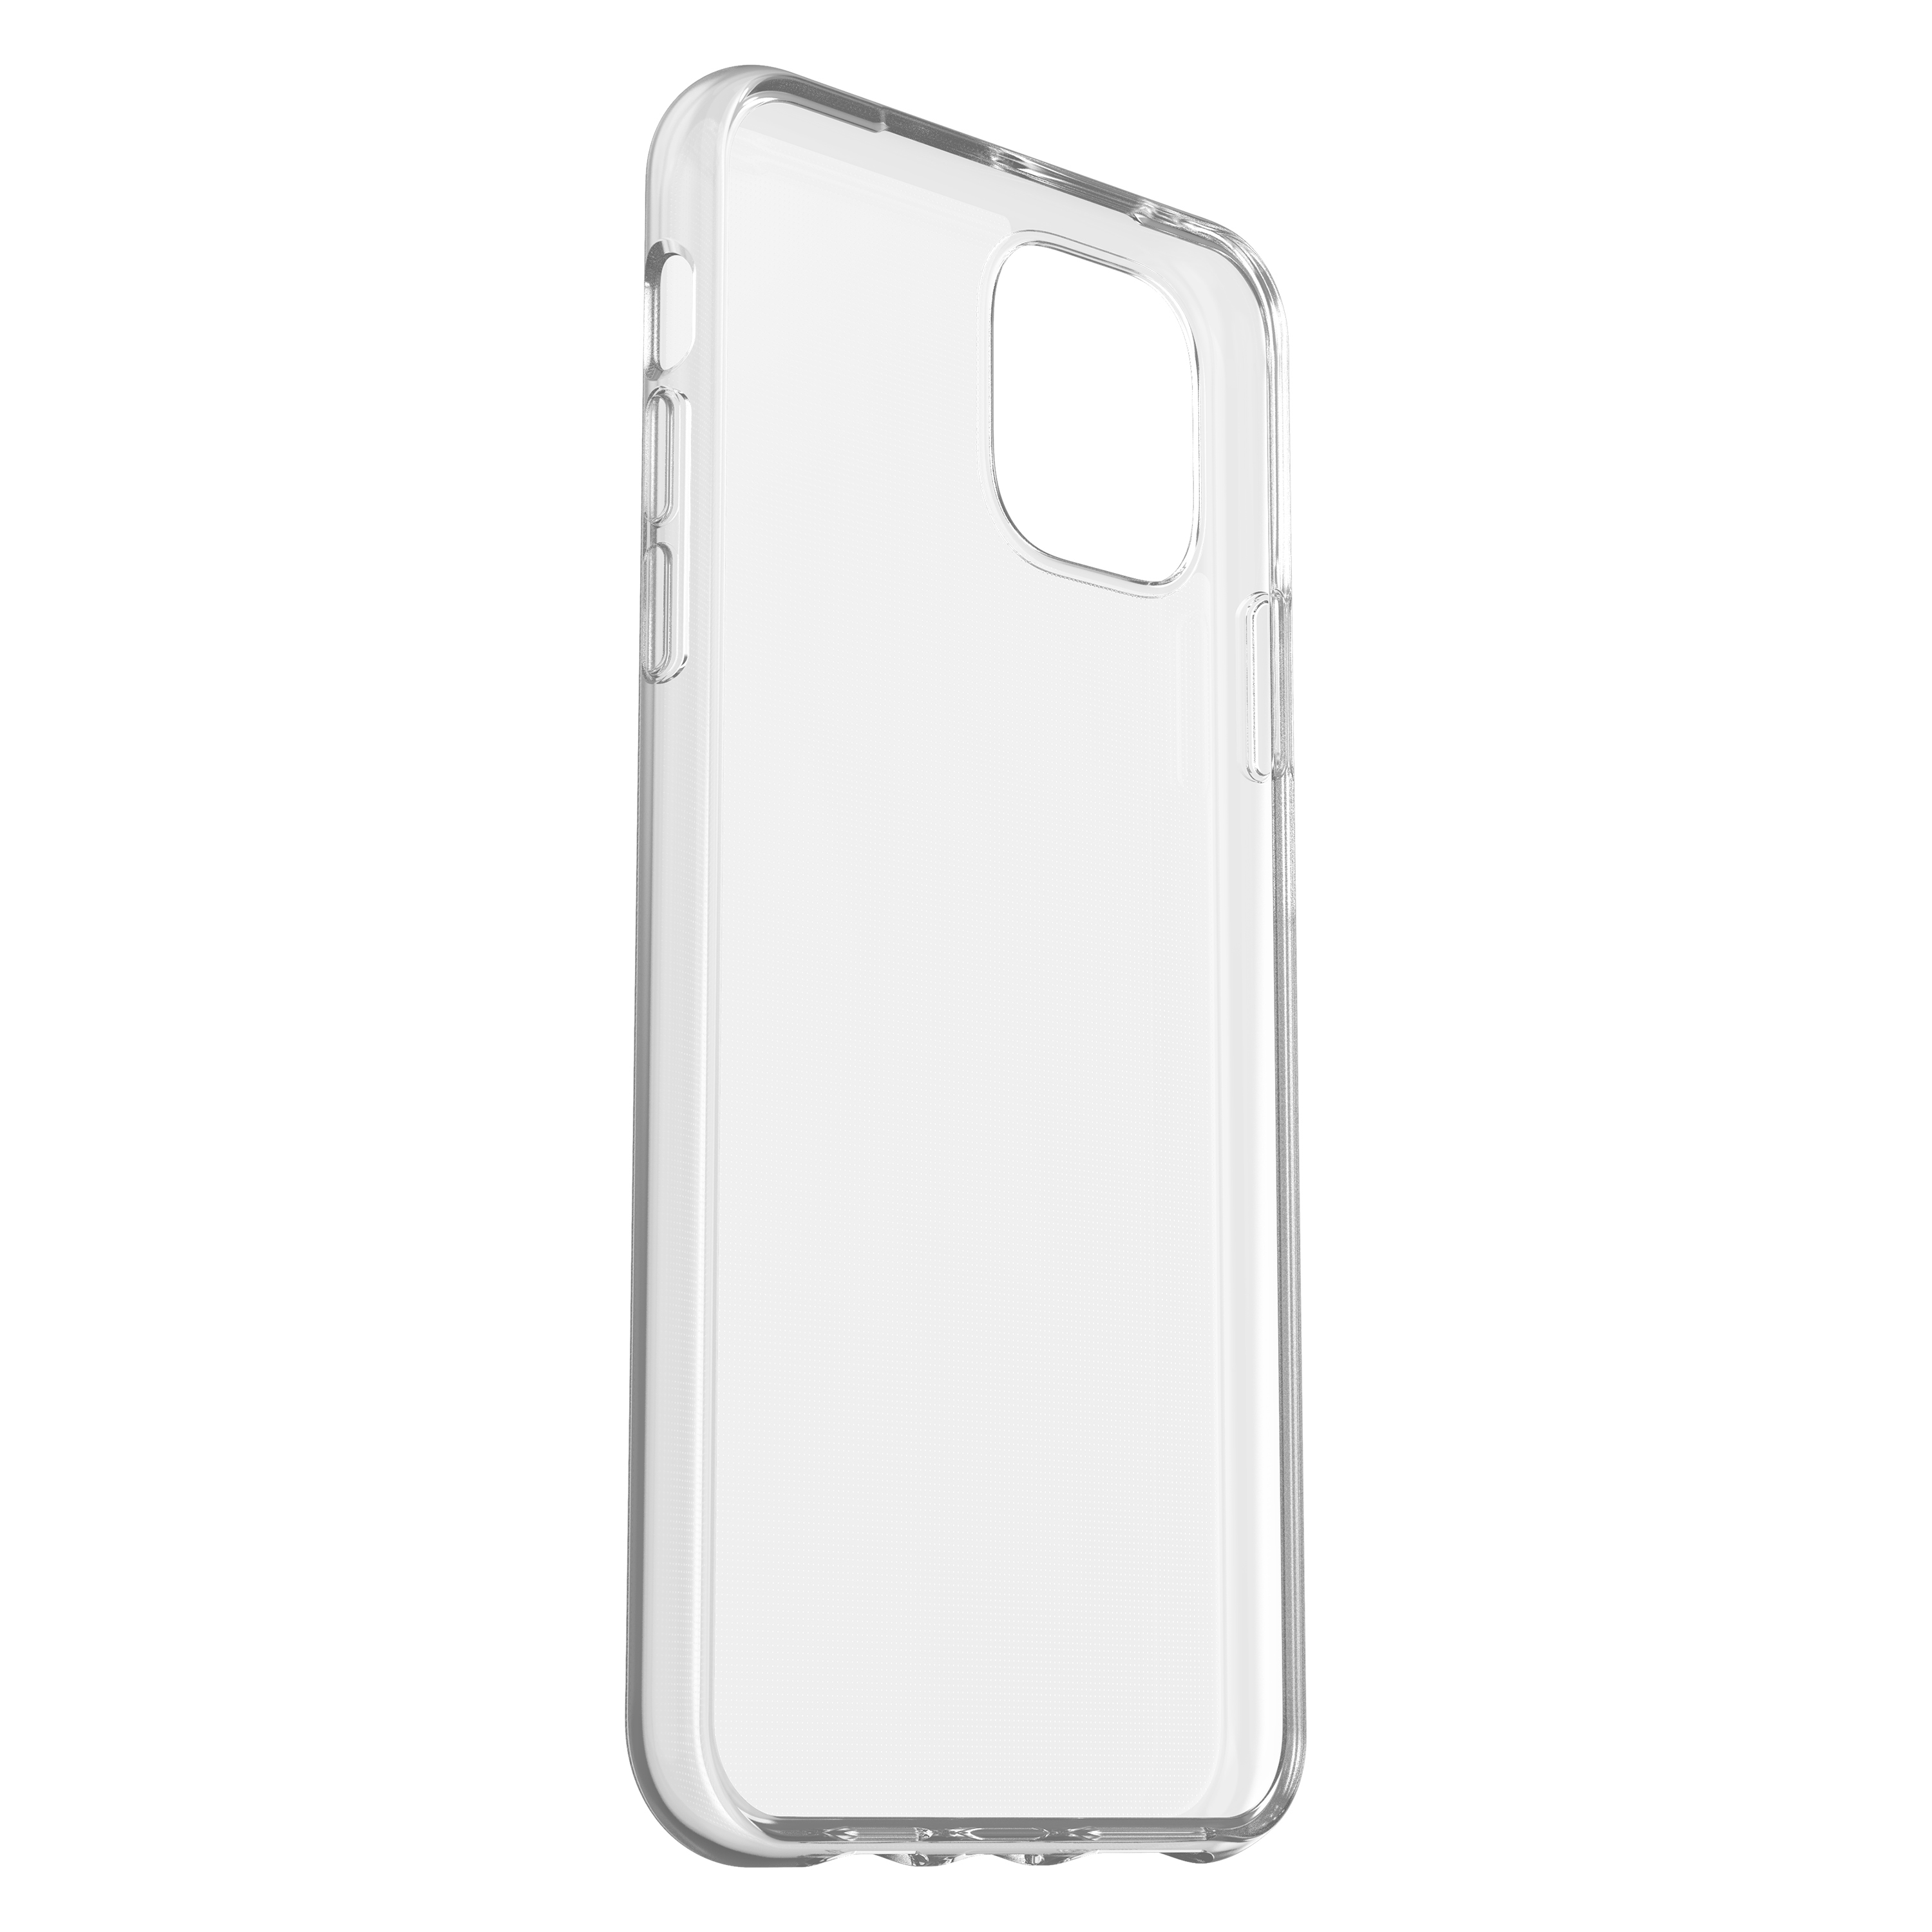 Backcover, Skin, Transparent Max, Apple, iPhone OTTERBOX Protected Pro 11 Clearly